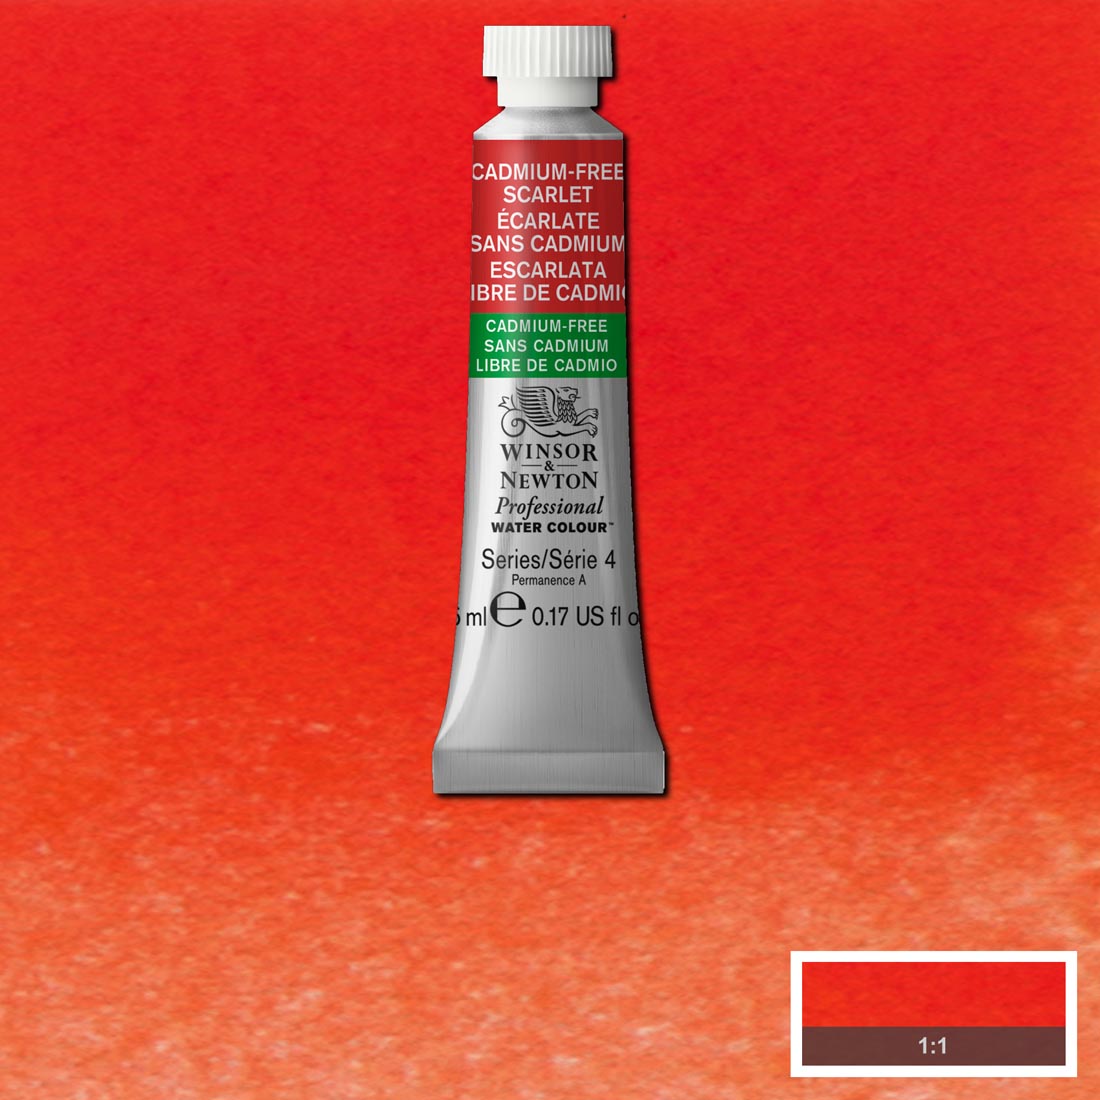 Tube of Cadmium-Free Scarlet Winsor & Newton Professional Water Colour with a paint swatch for the background